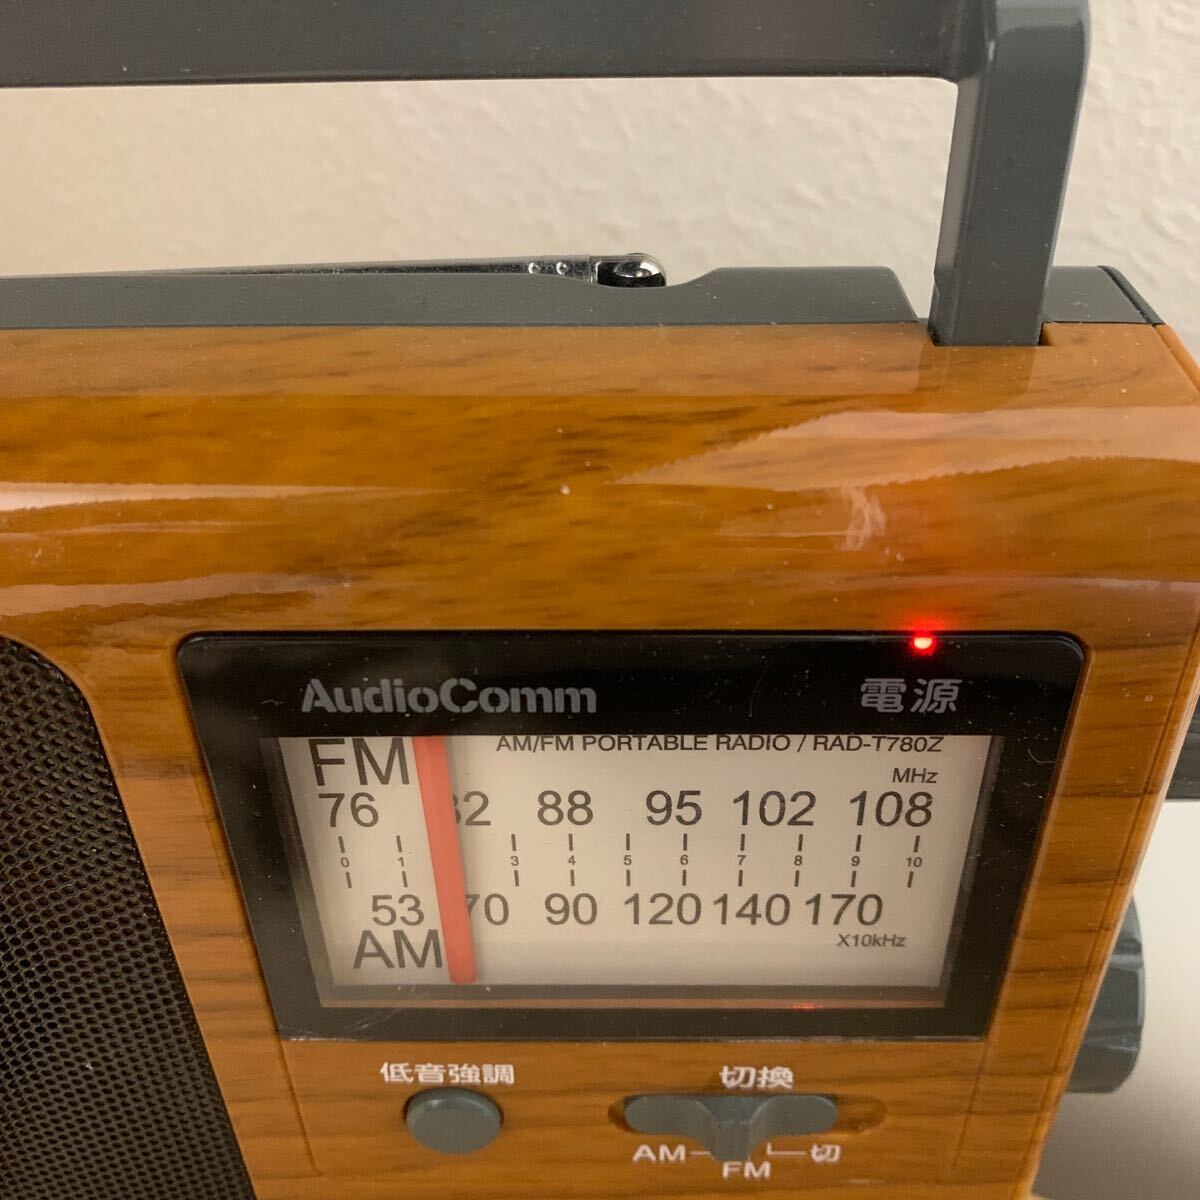 [AudioComm]AM/FM wood grain portable radio RAD-780Z-WK operation goods corporation ohm electro- machine 2019 year made radio disaster prevention goods [ all country uniform carriage 520 jpy ]